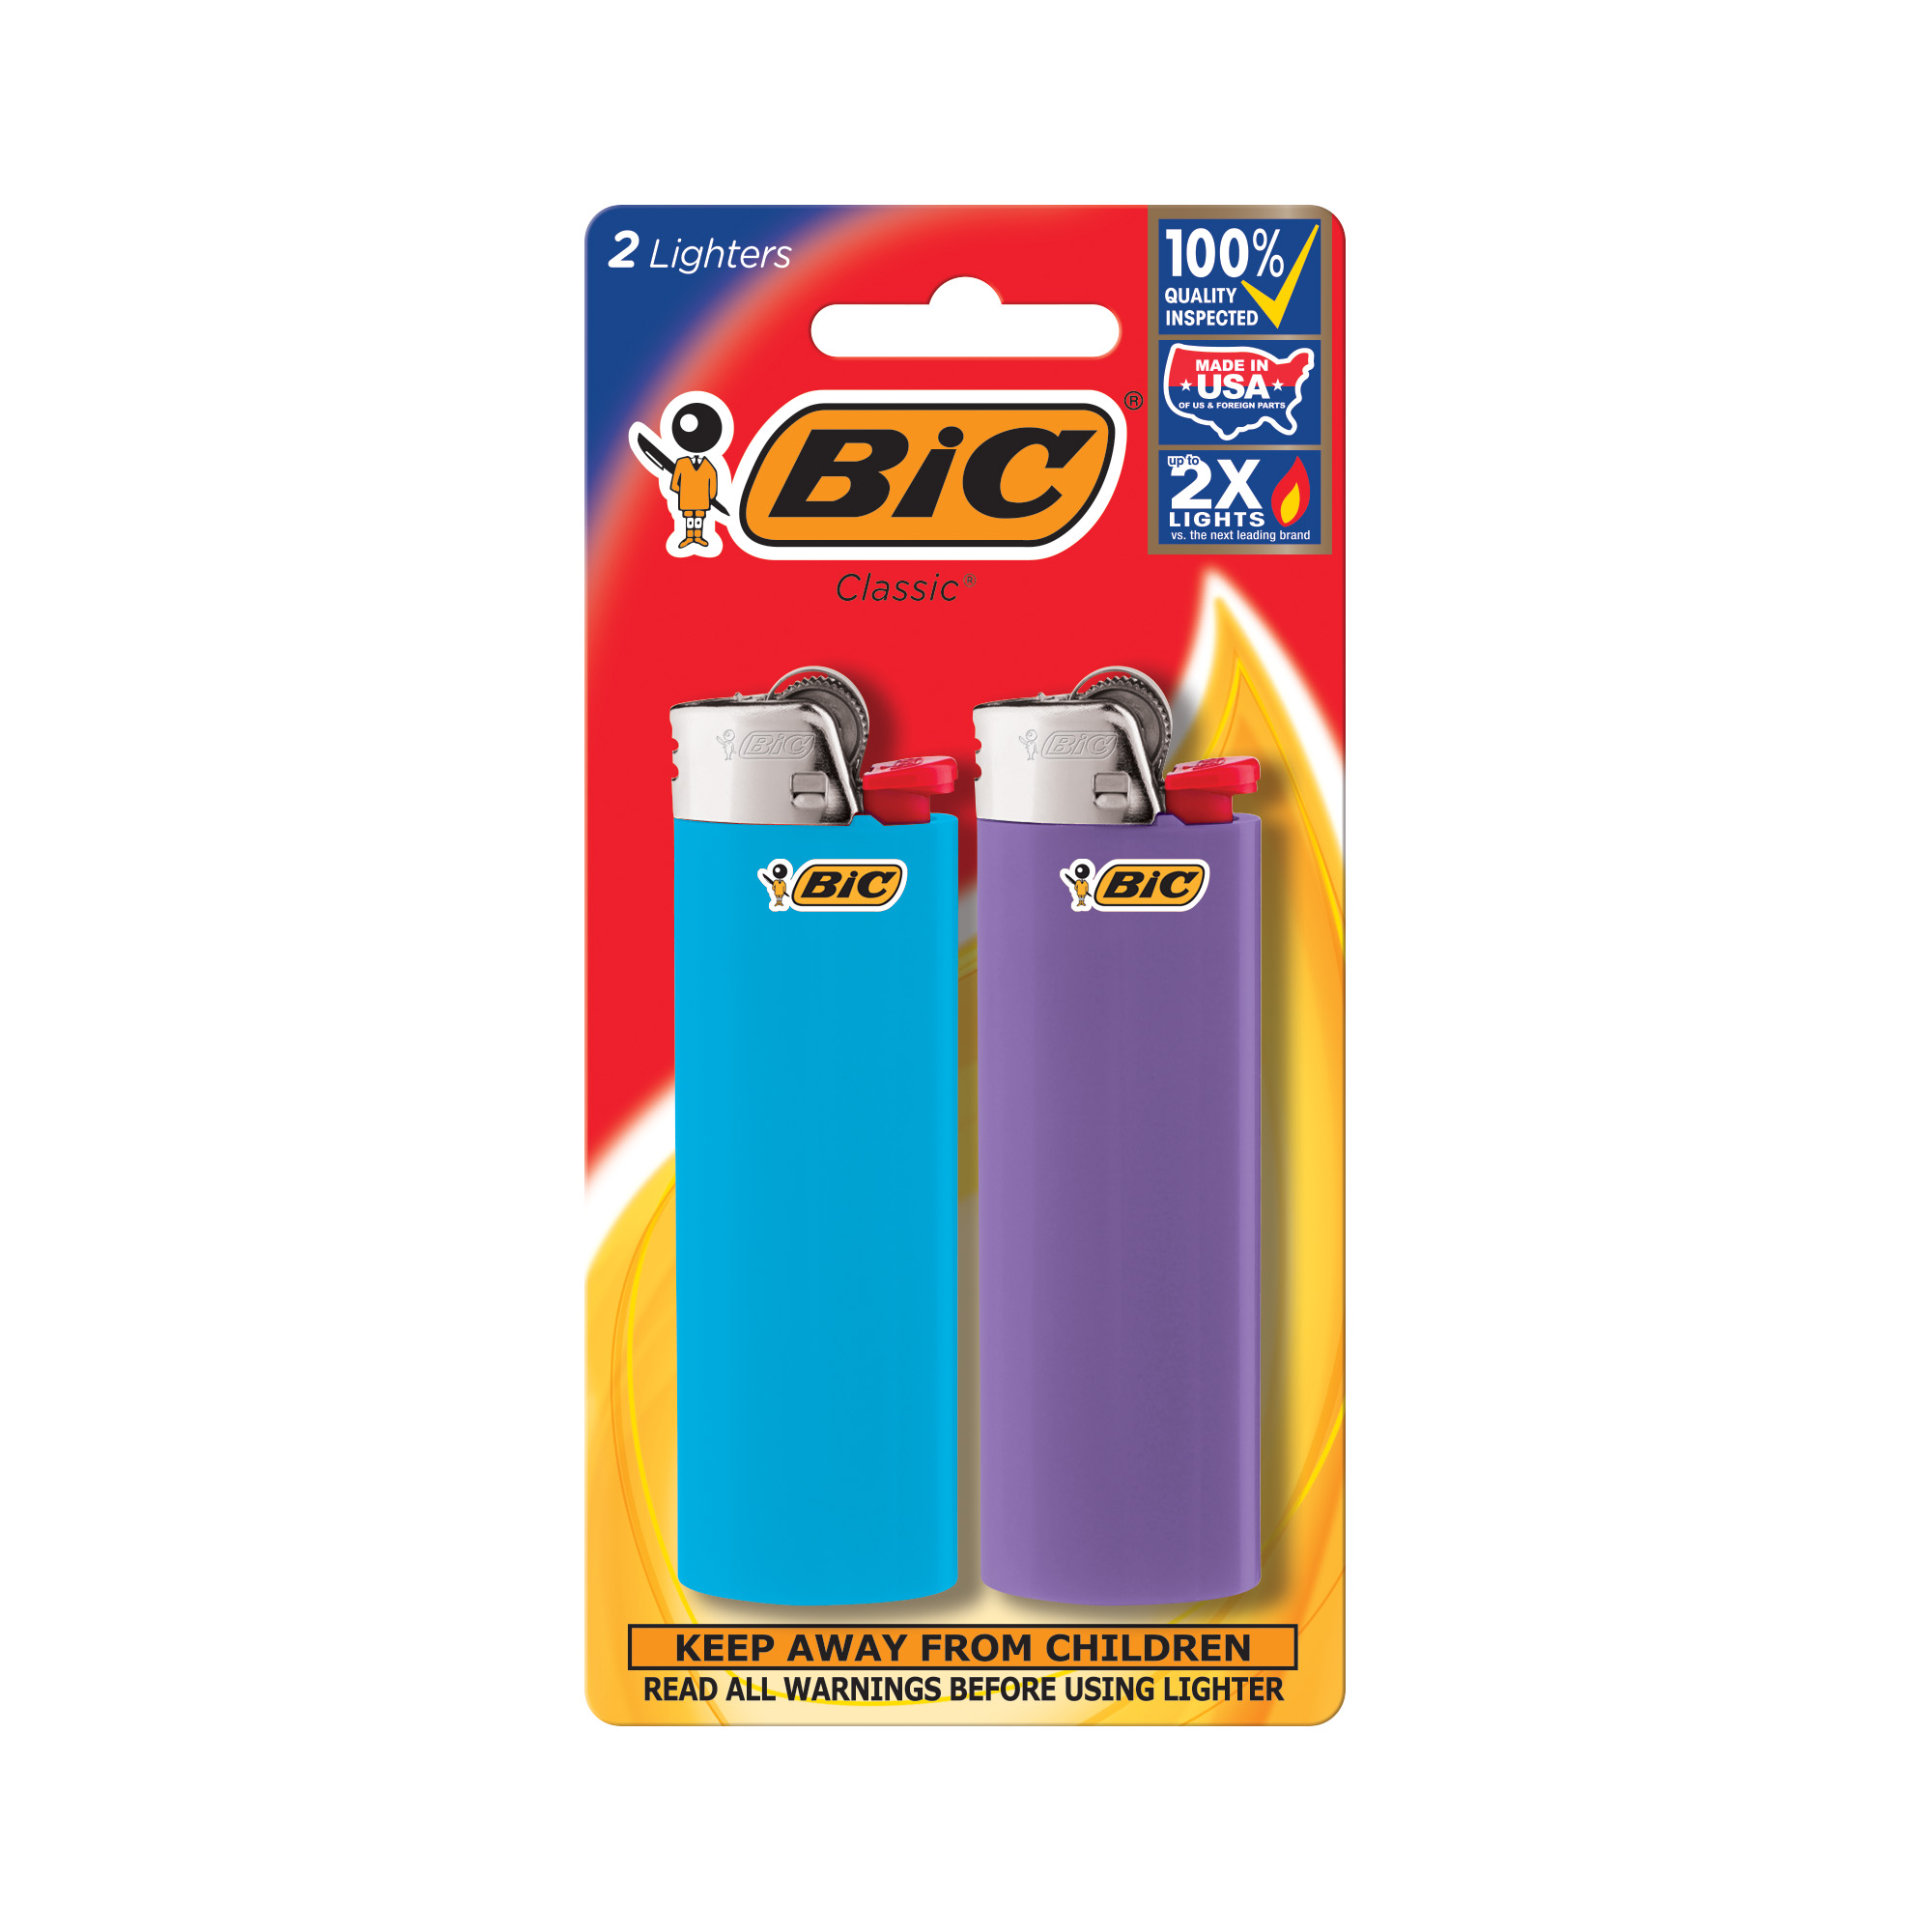 BIC Classic Pocket Lighter, Assorted Colors, 2 Pack - image 1 of 7